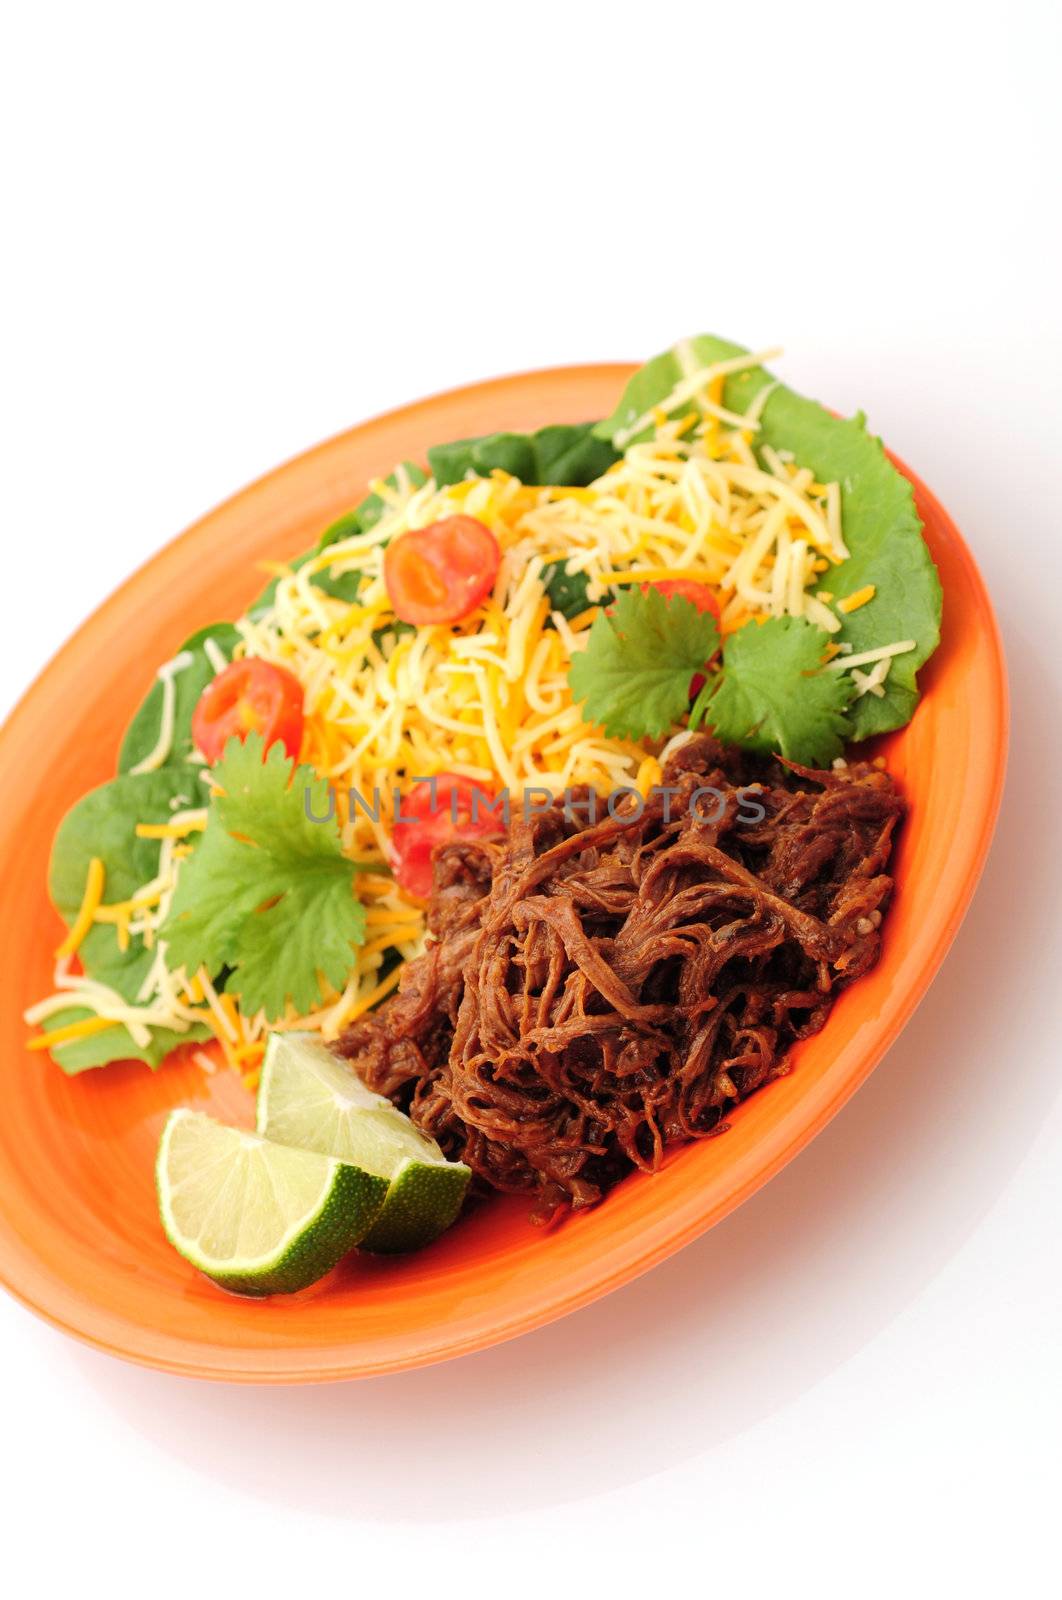 Shredded barbeque beef on an orange plate with a healthy salad